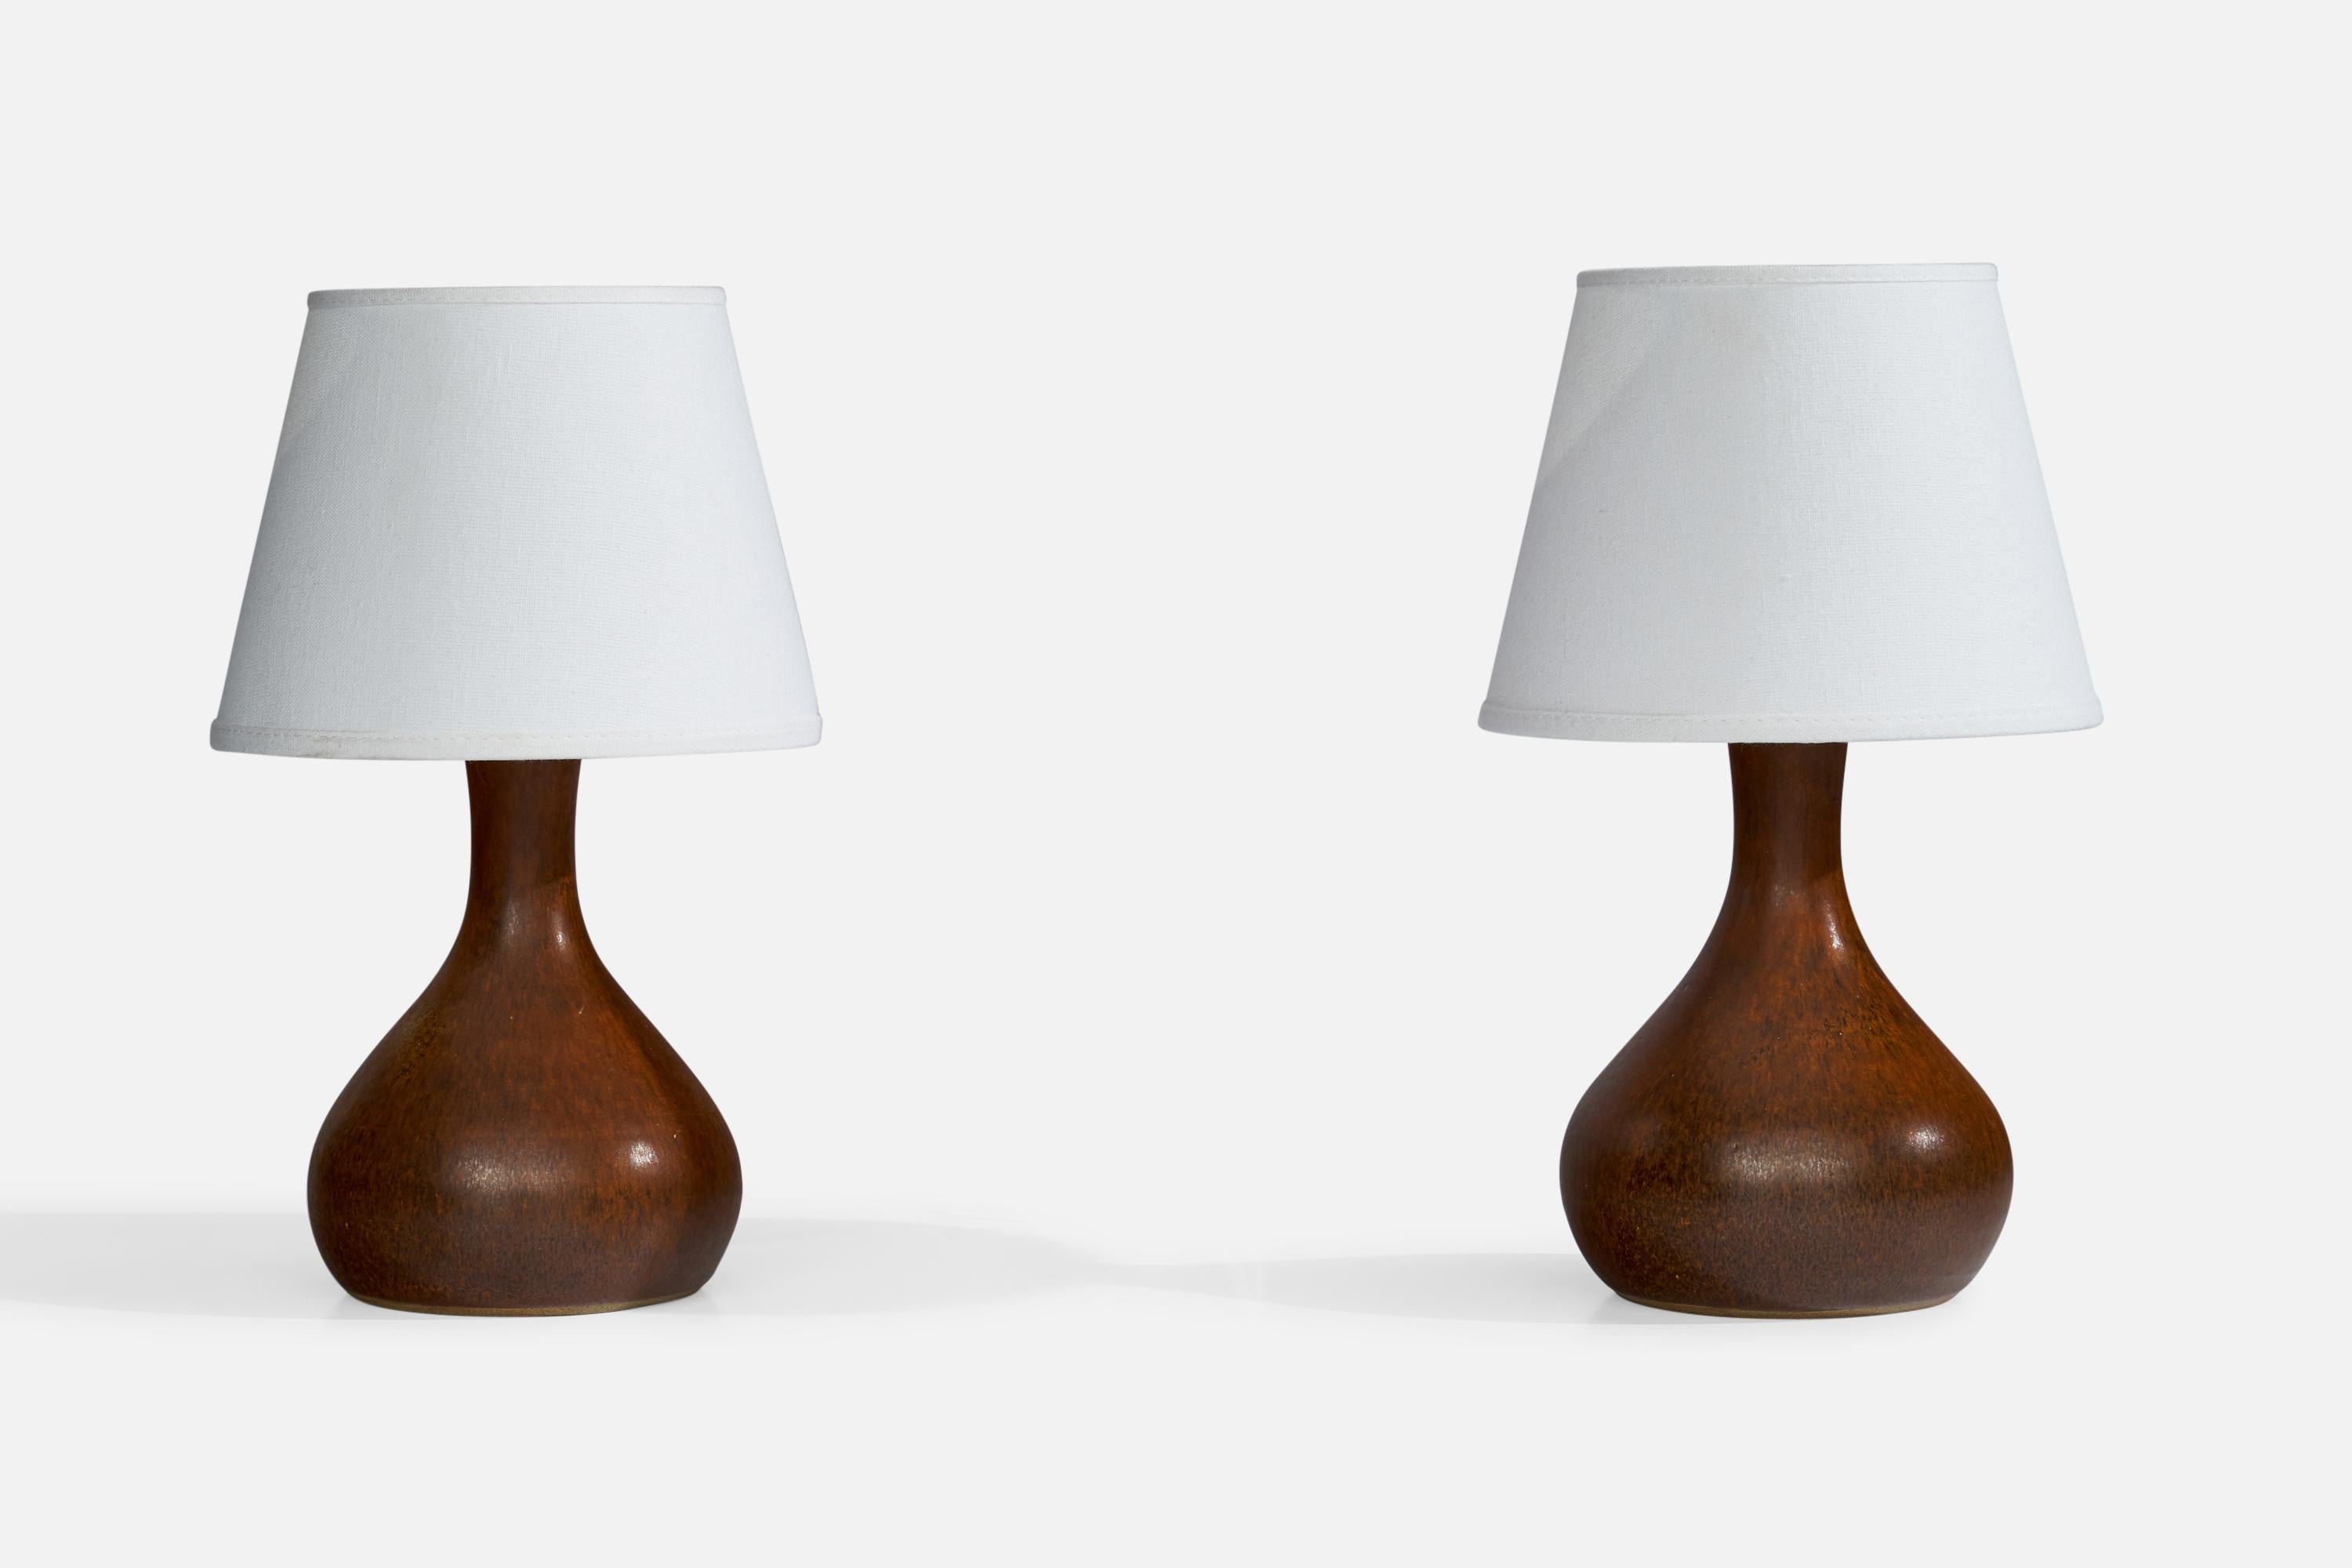 A pair of brown-glazed ceramic table lamps designed and produced in Sweden, c. 1960s.

Dimensions of Lamp (inches): 10.25” H x 5.5” Diameter
Dimensions of Shade (inches): 5.25”  Top Diameter x 8”  Bottom Diameter x 6” H
Dimensions of Lamp with Shade